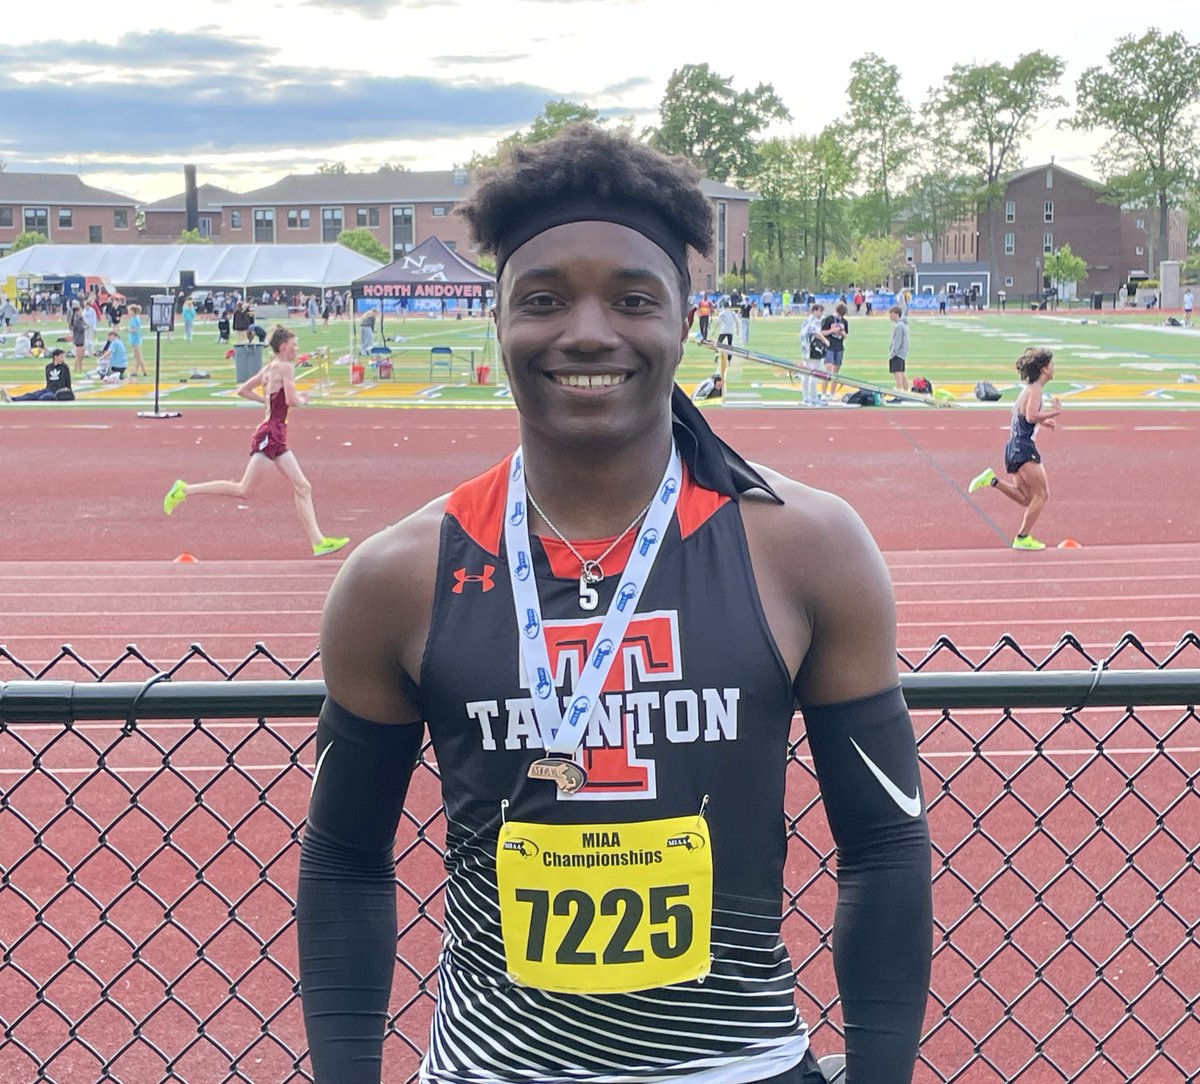 First Medal of MIAA Division 1 Championships! Dmitrius placed 6th overall in the 200m dash.